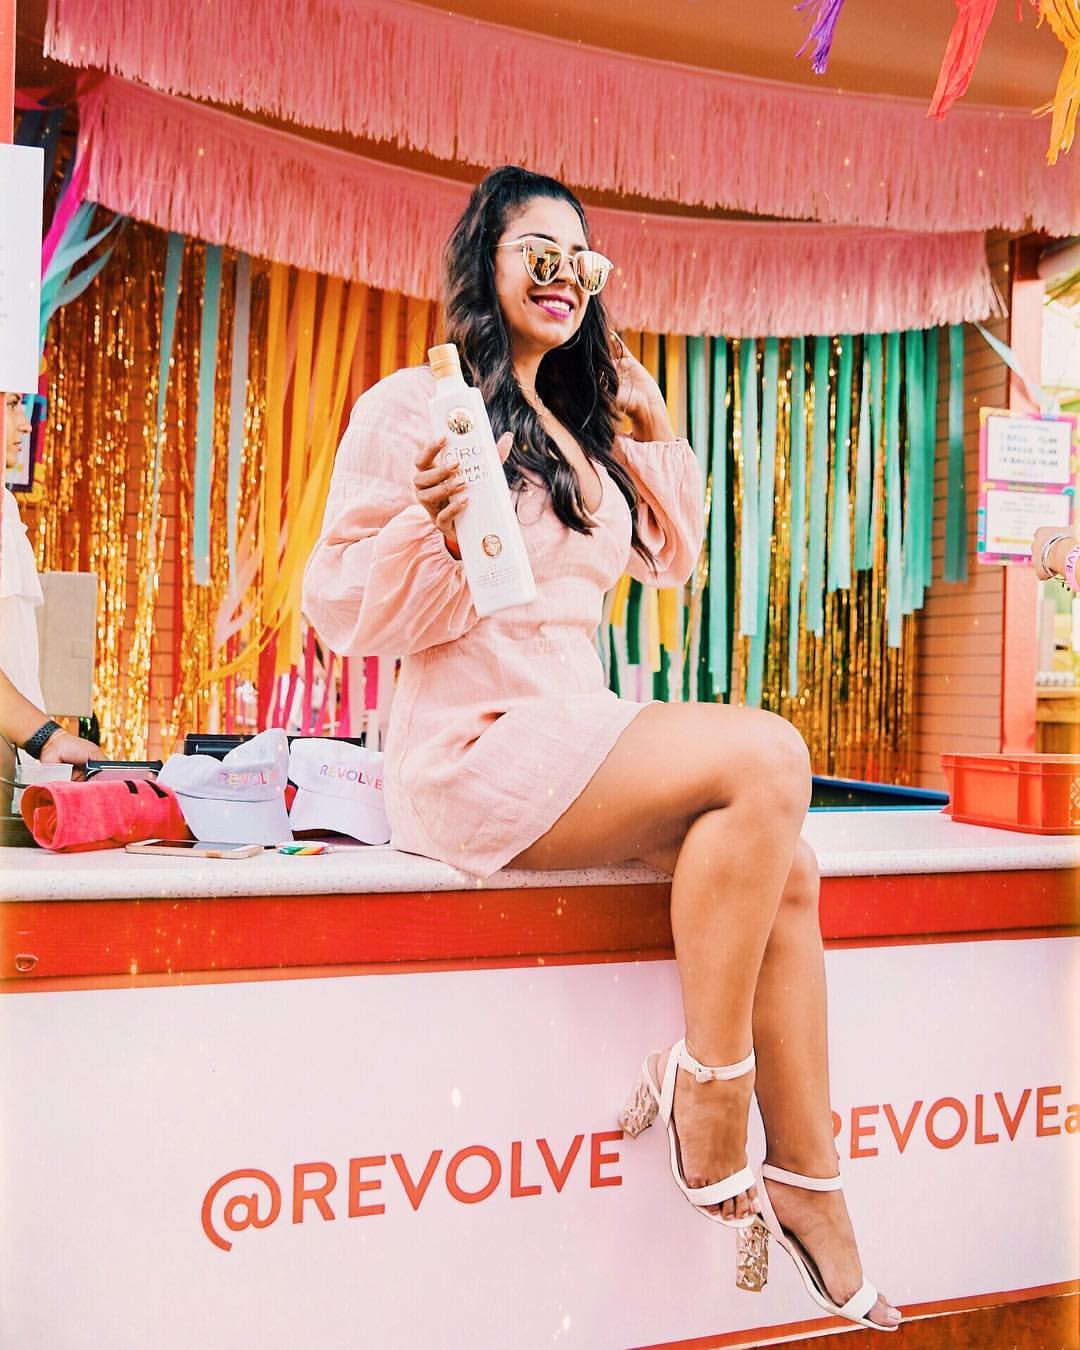 Custom Decor & Styling for Revolve Carnival Event by Amazing Pinatas